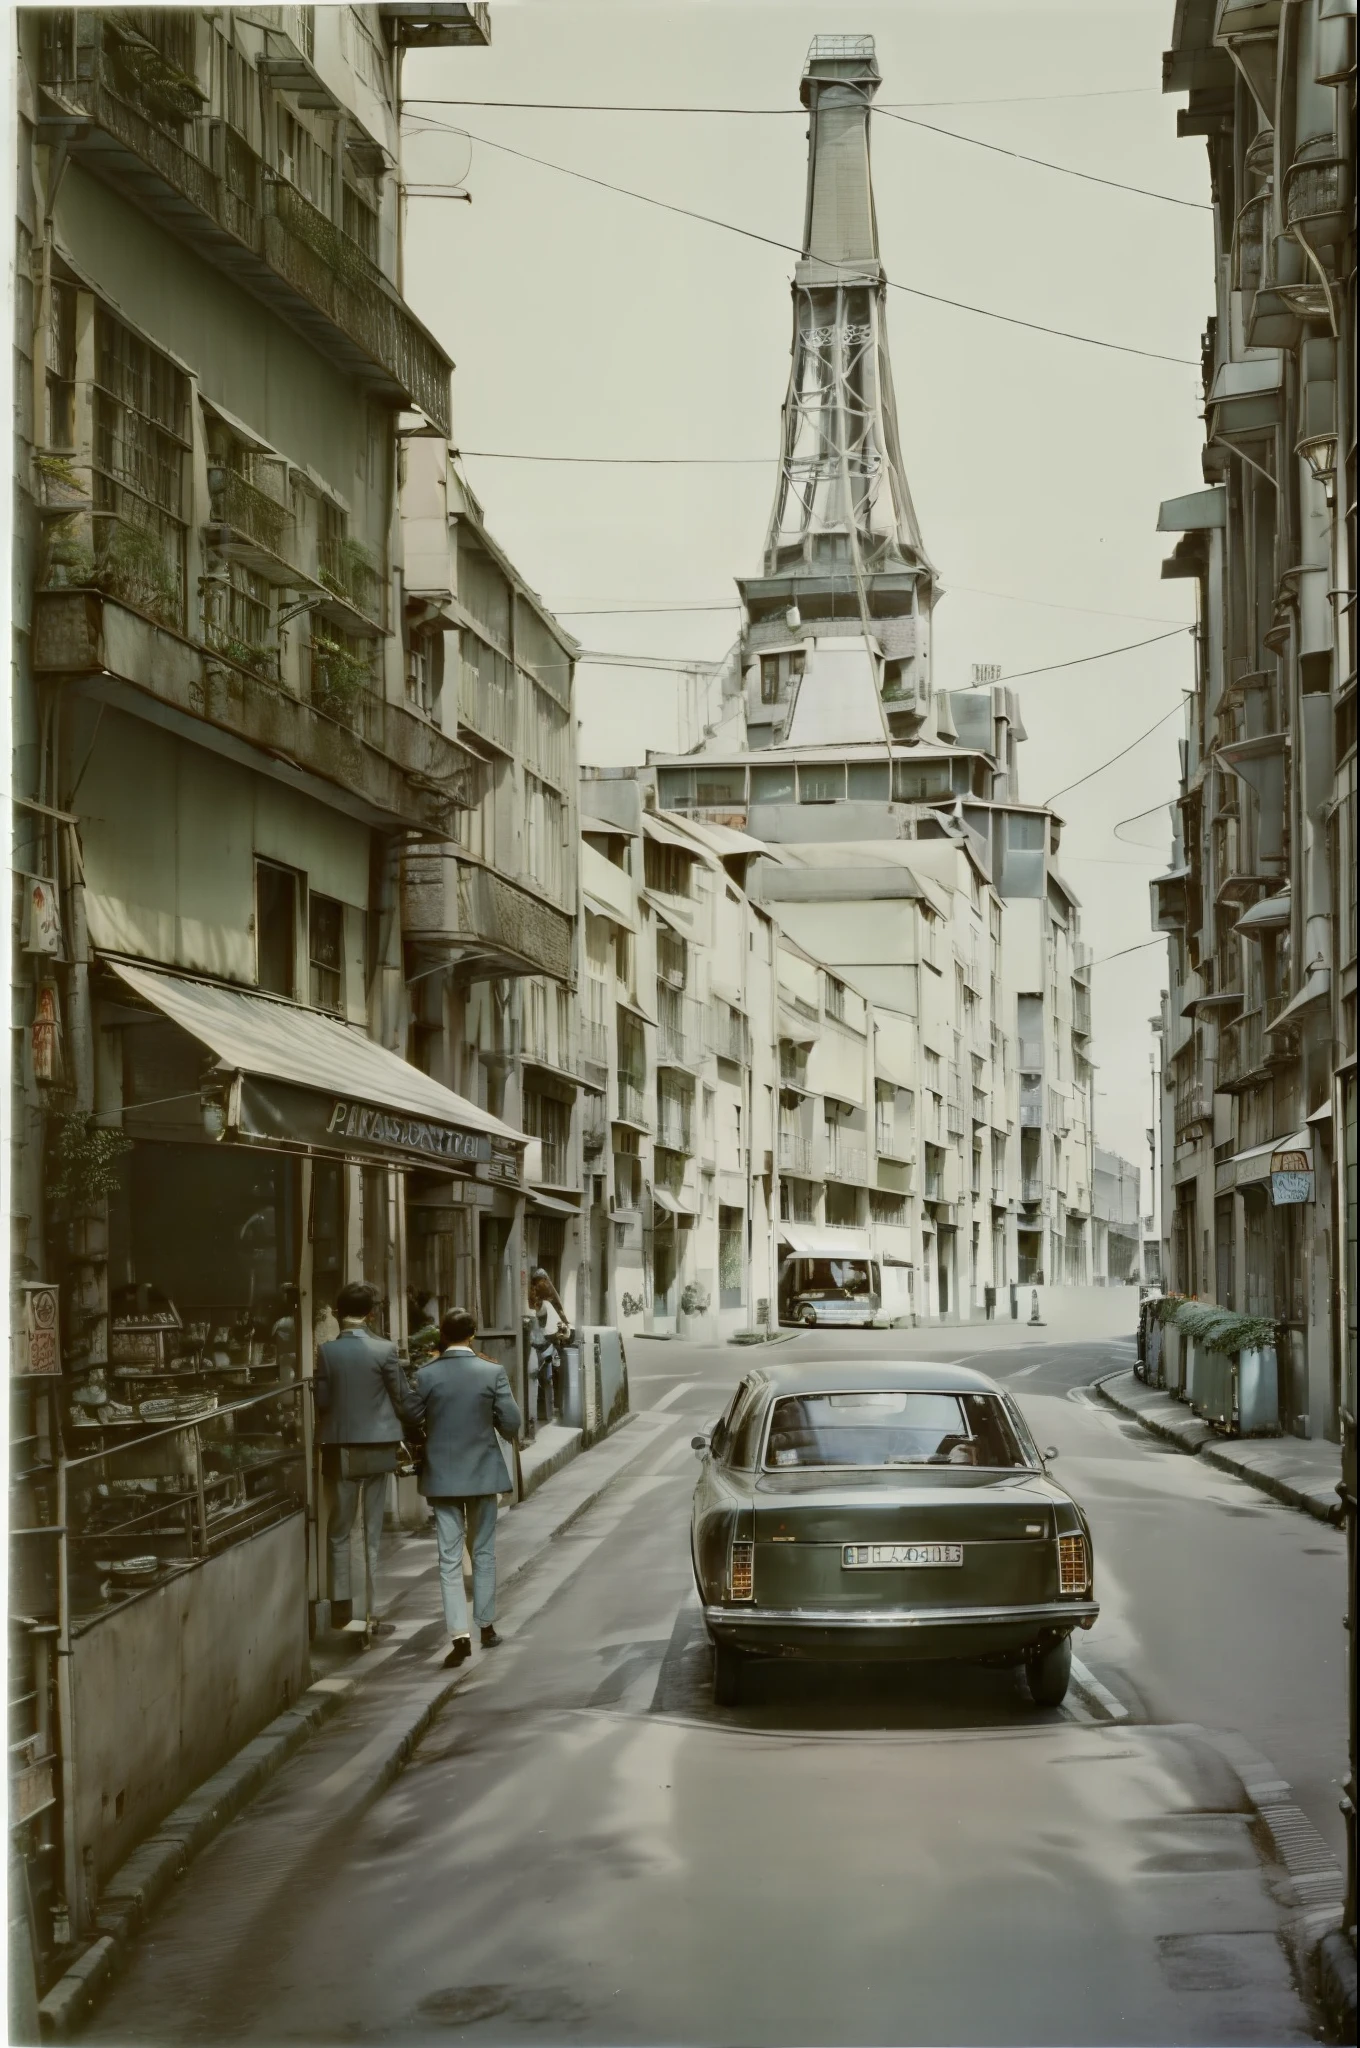 Scenery of Paris in the 1970s, vintage photograph